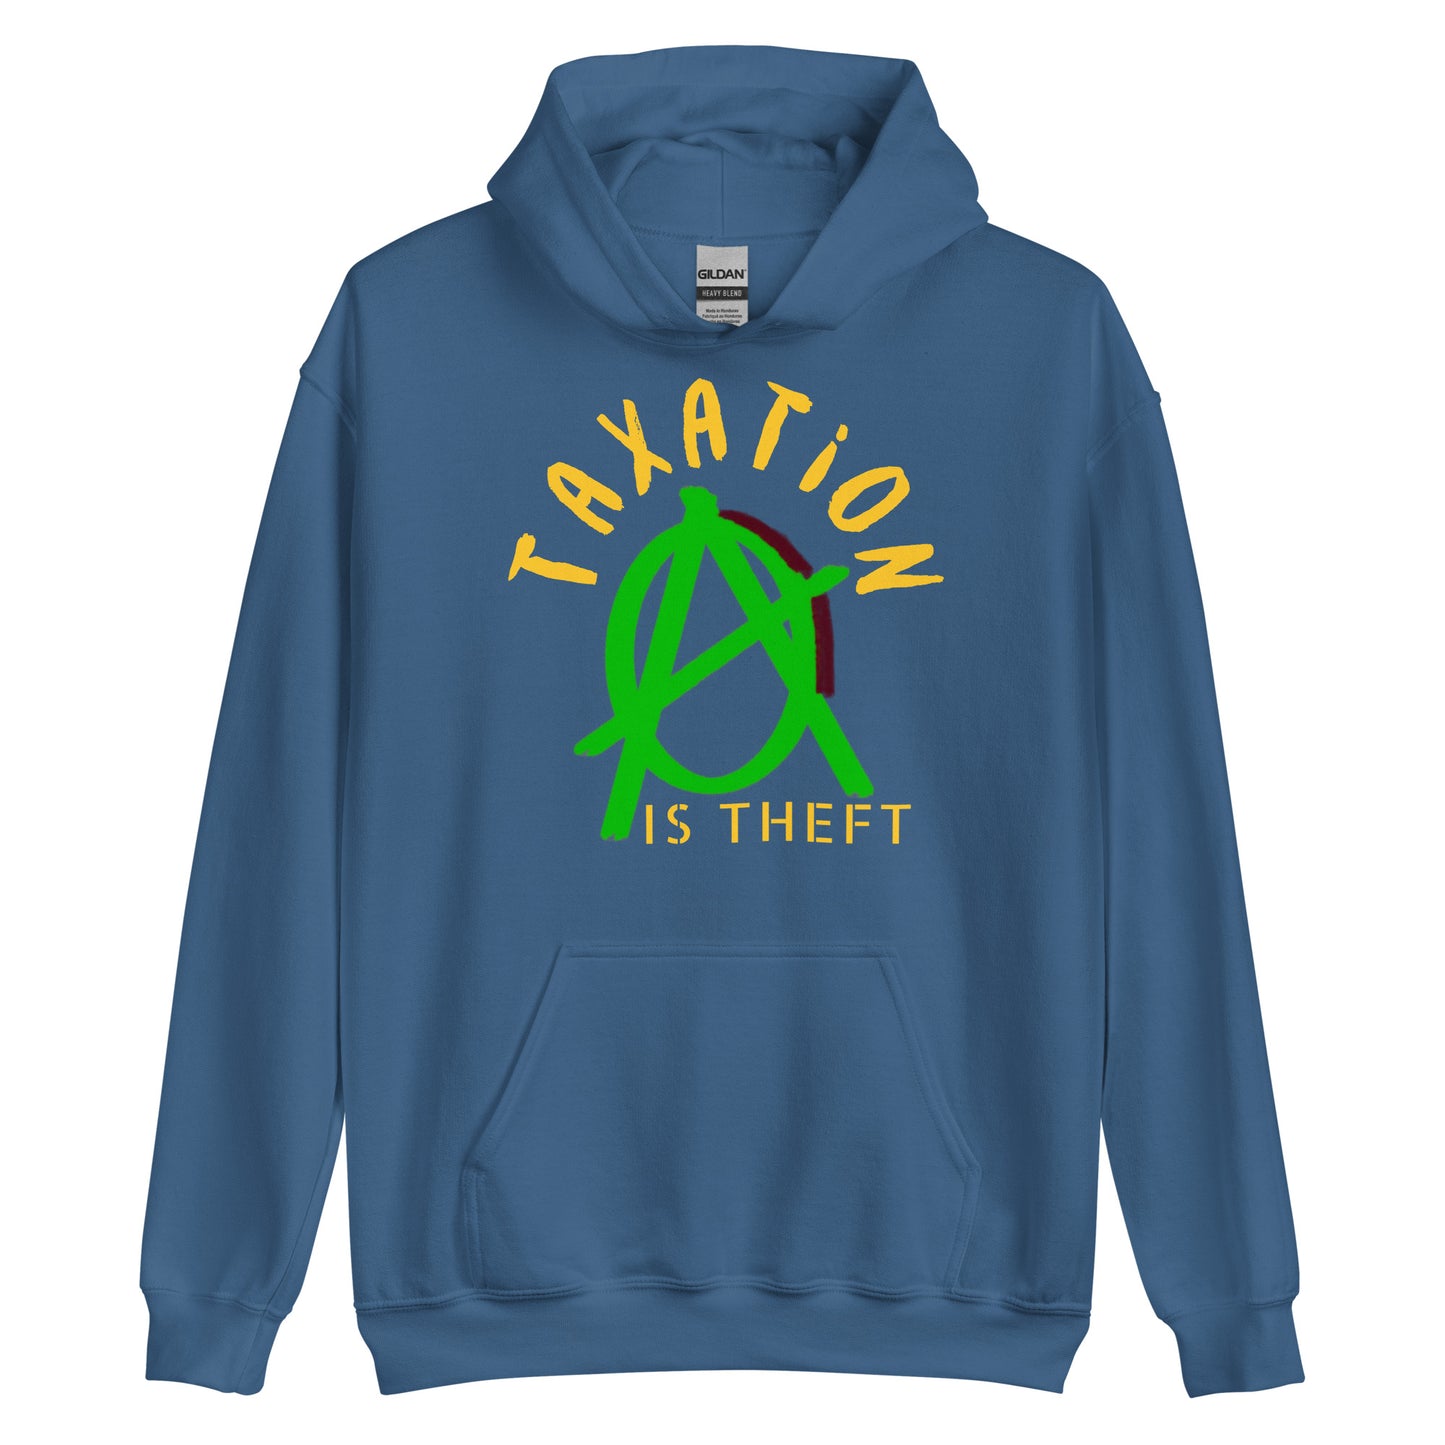 Anarchy Wear Green "Taxation Is Theft" Hoodie